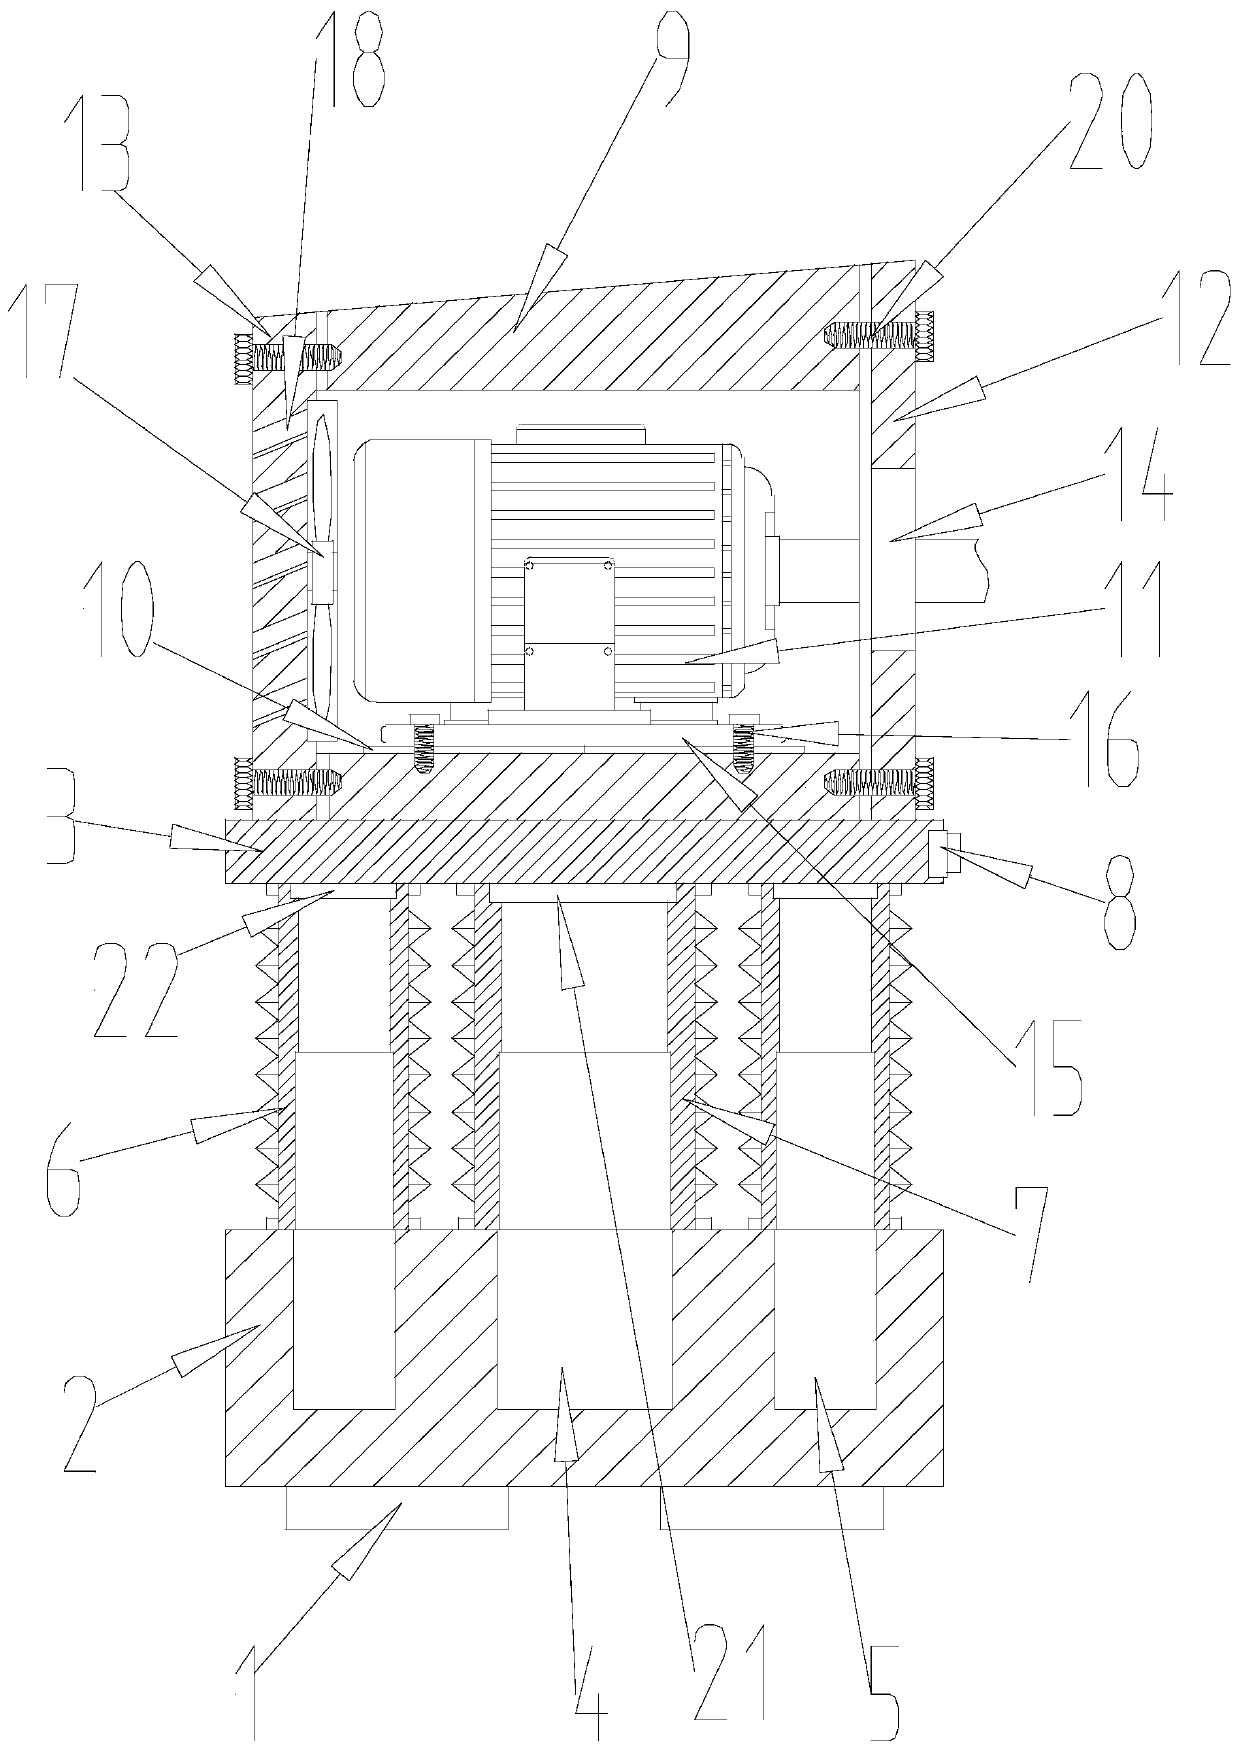 Motor protection device for water level control